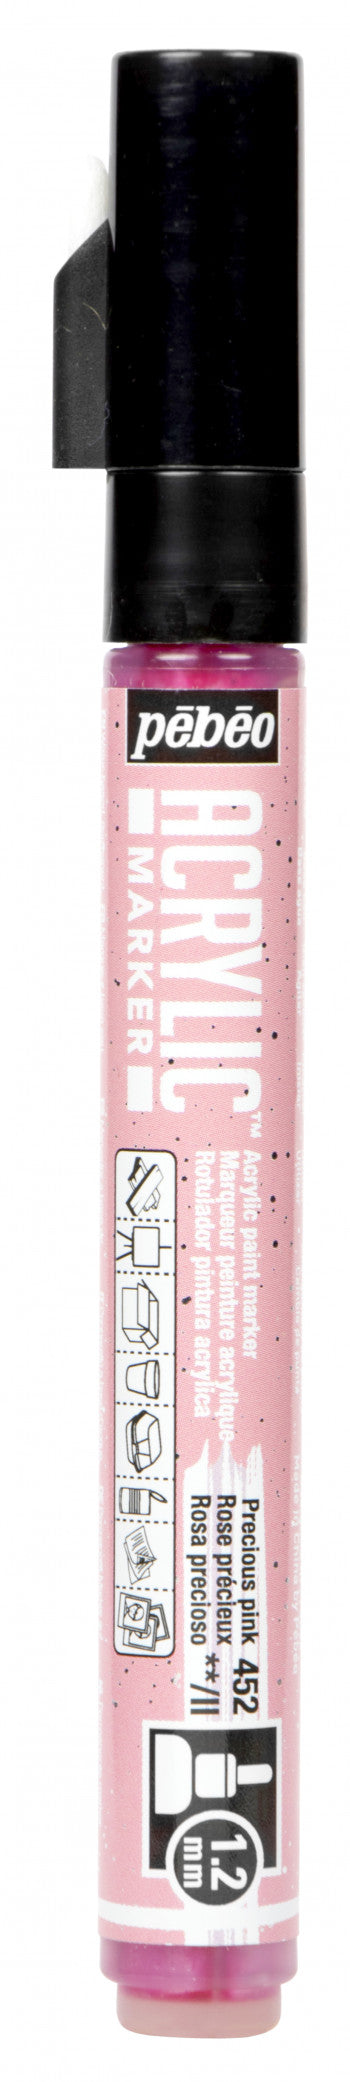 Acrylic Marker 1.2mm Pebeo     Rose précieux - 452